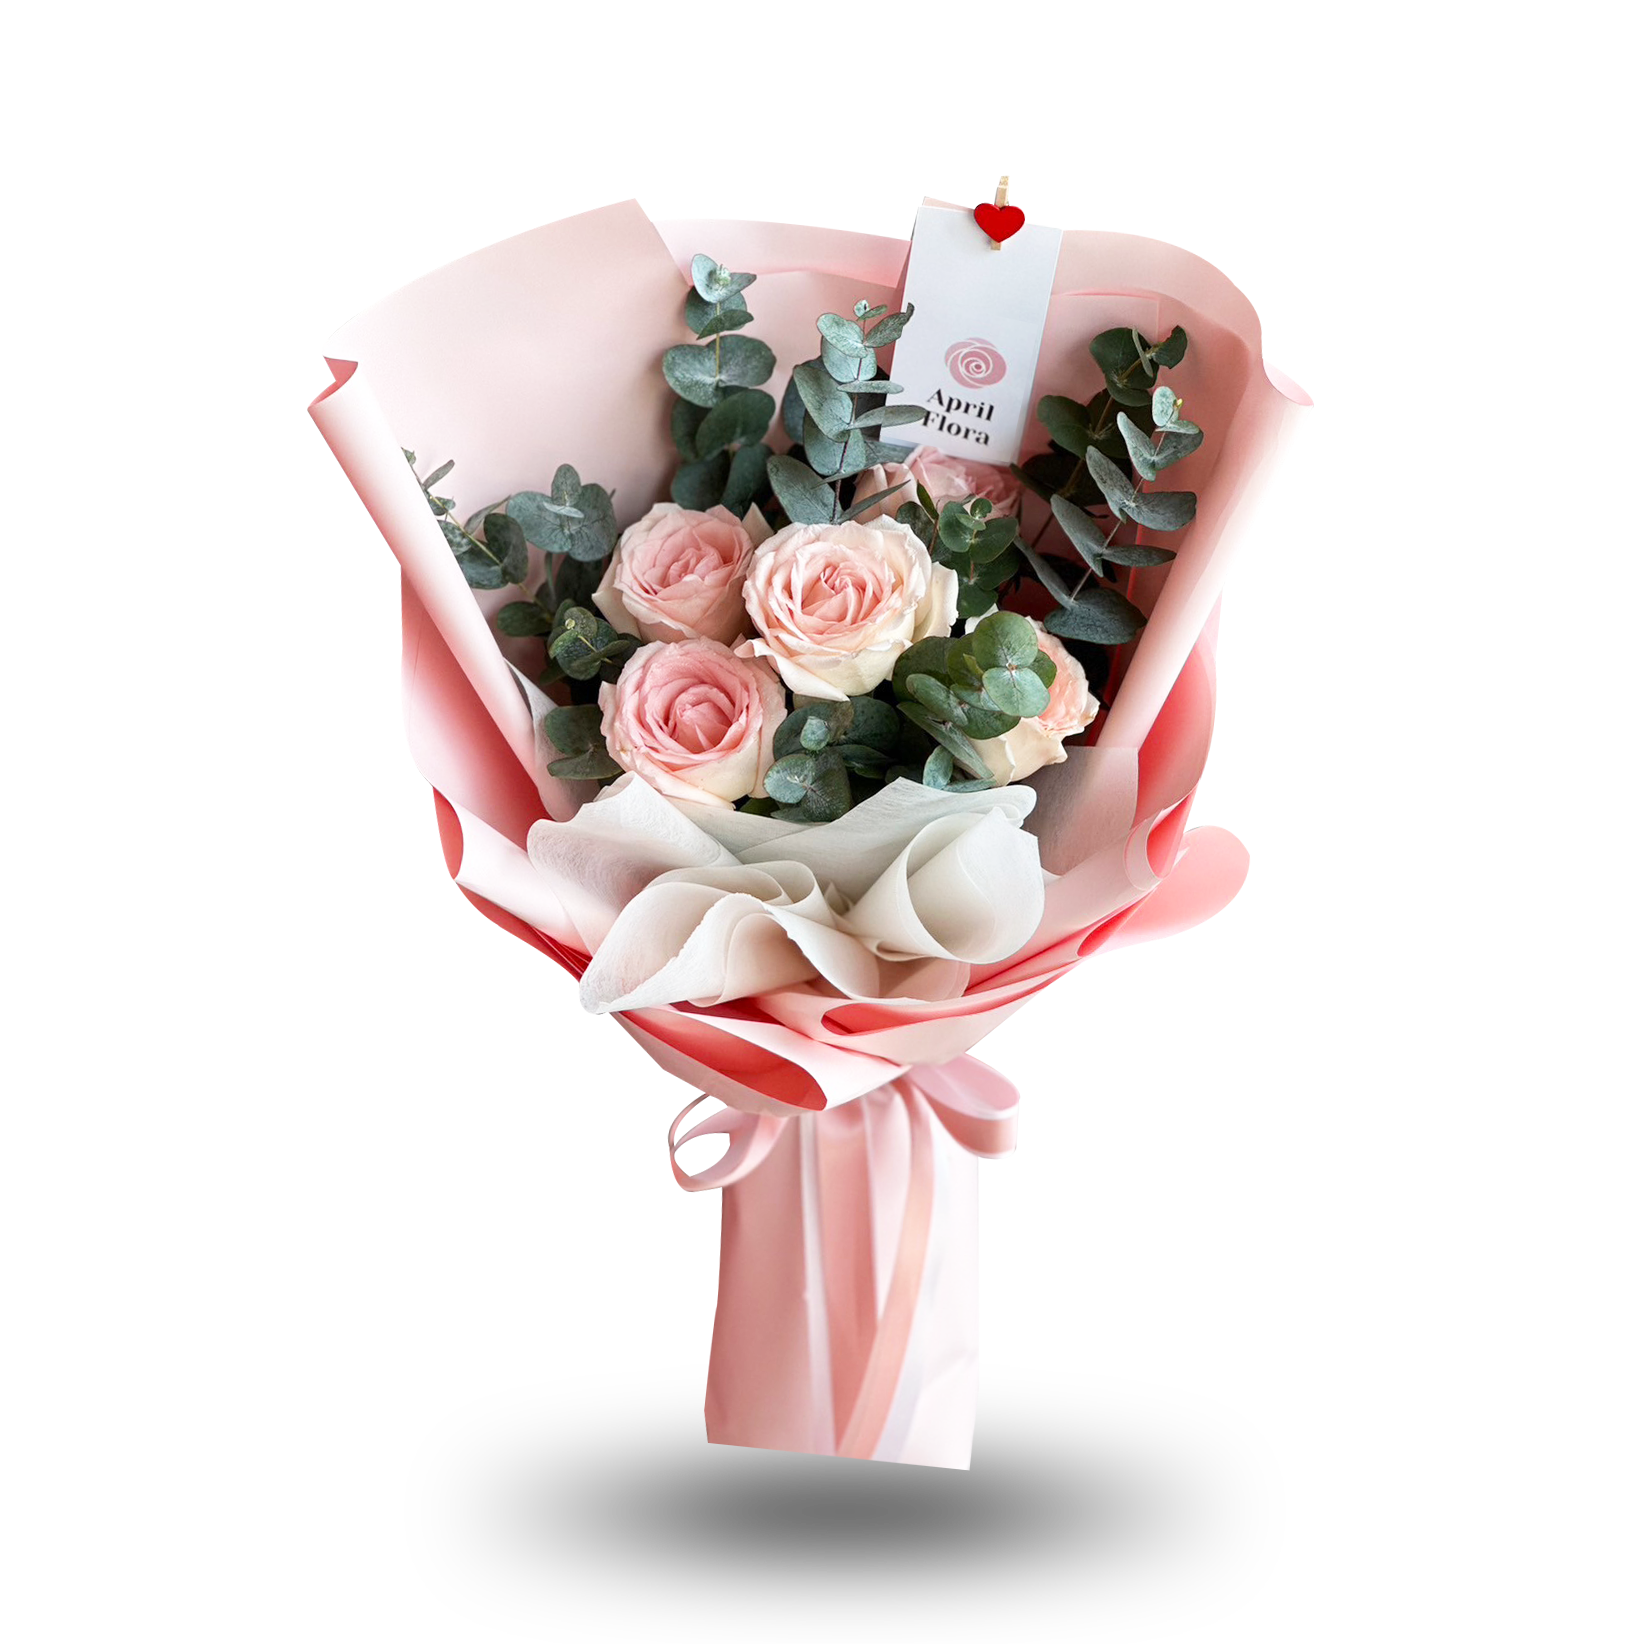 "My Angel" bouquet of 5 pink roses - Phuket